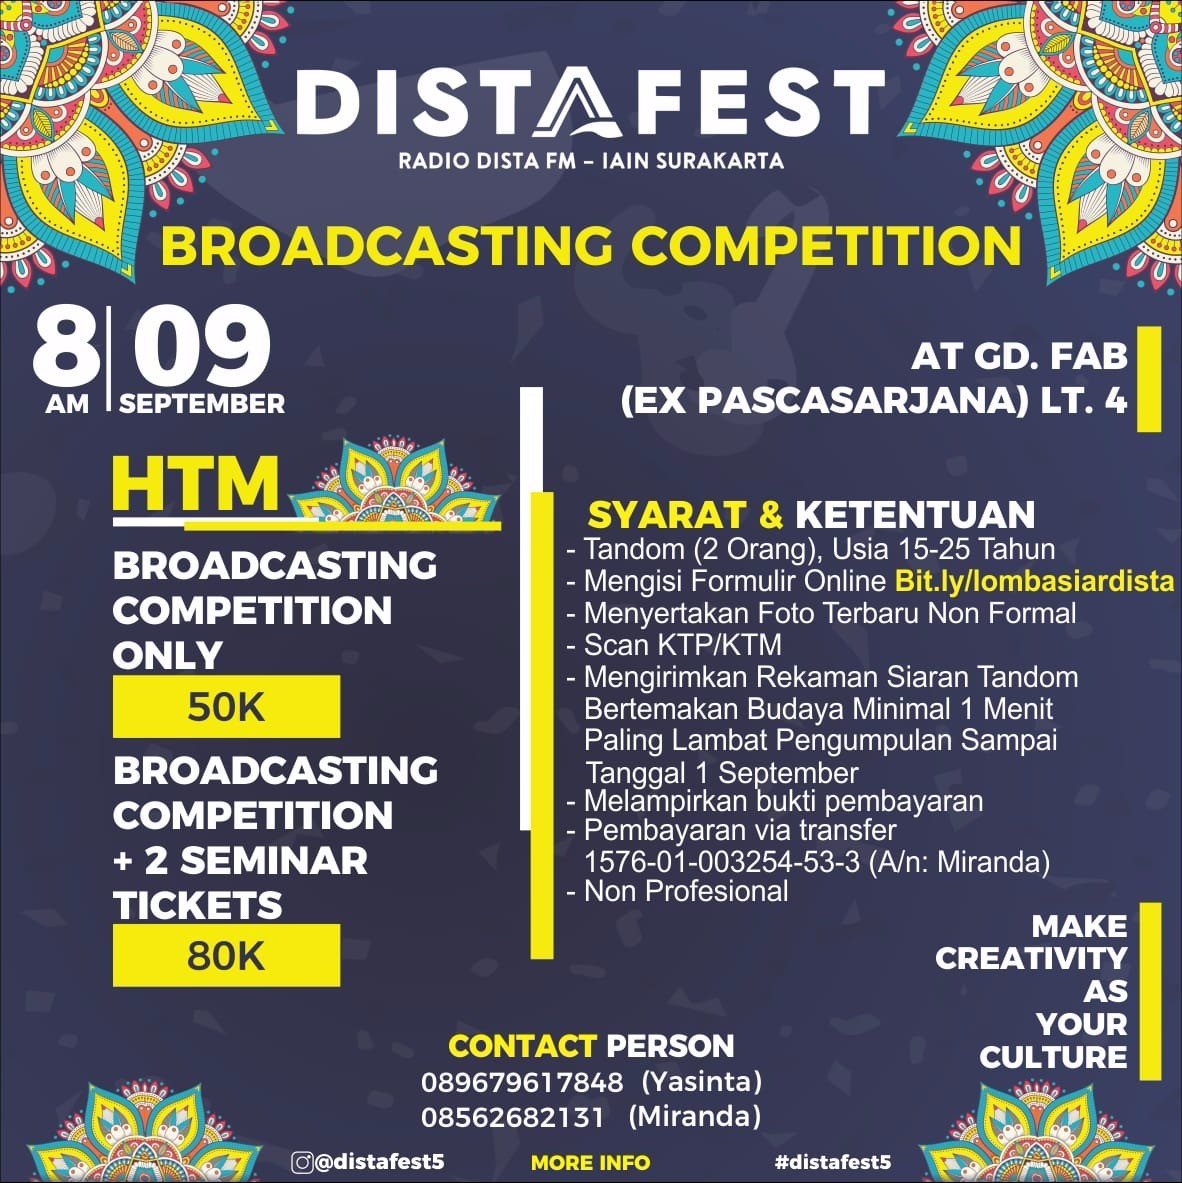 Poster Distafest broadcasting competition